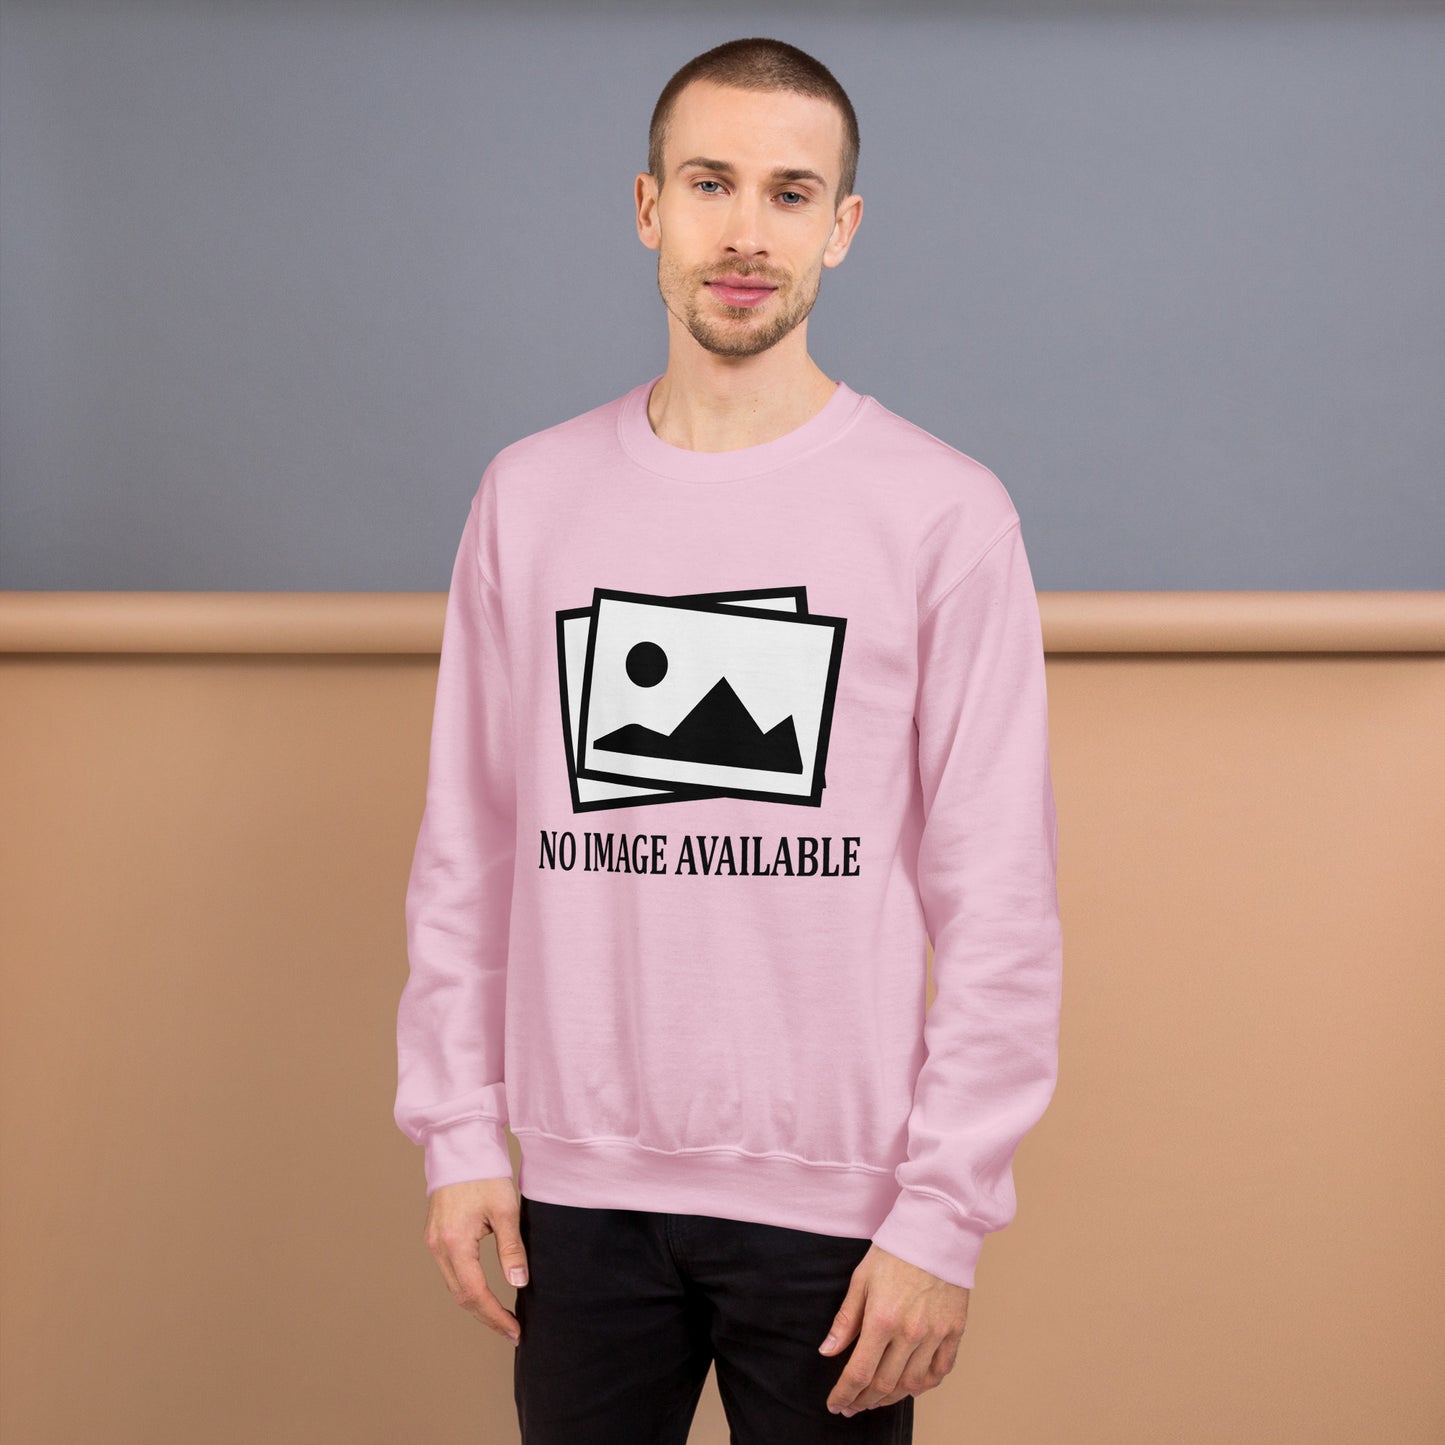 Men with pink sweatshirt with image and text "no image available"